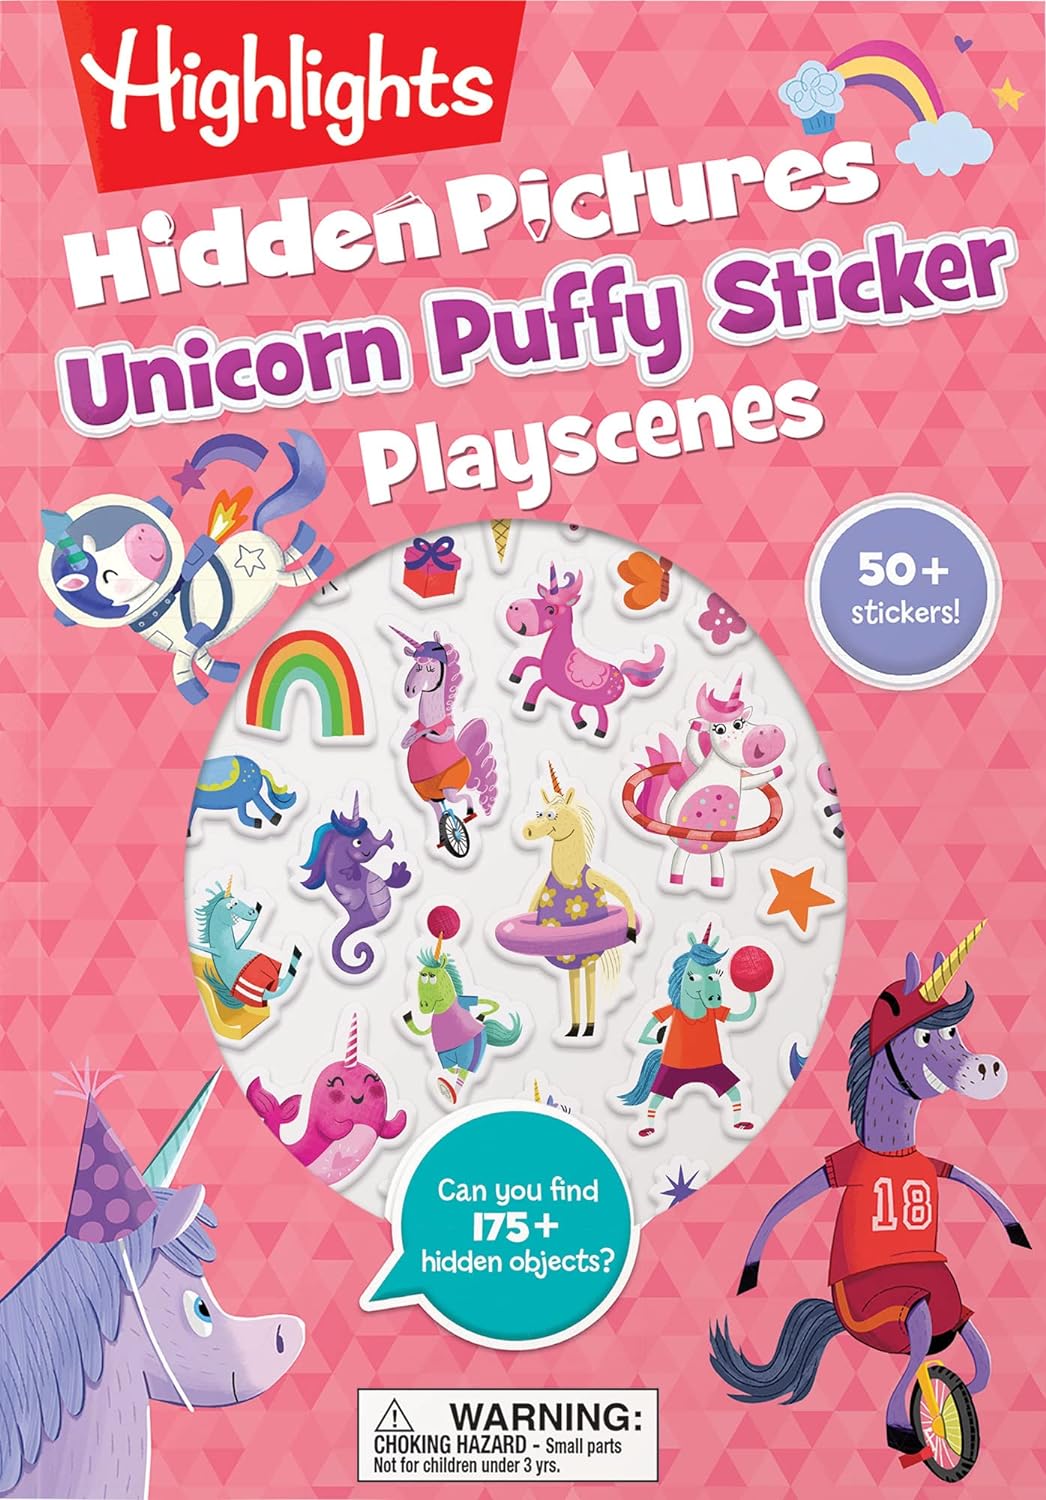 Highlights Hidden Pictures Unicorn Puffy Sticker Playscenes